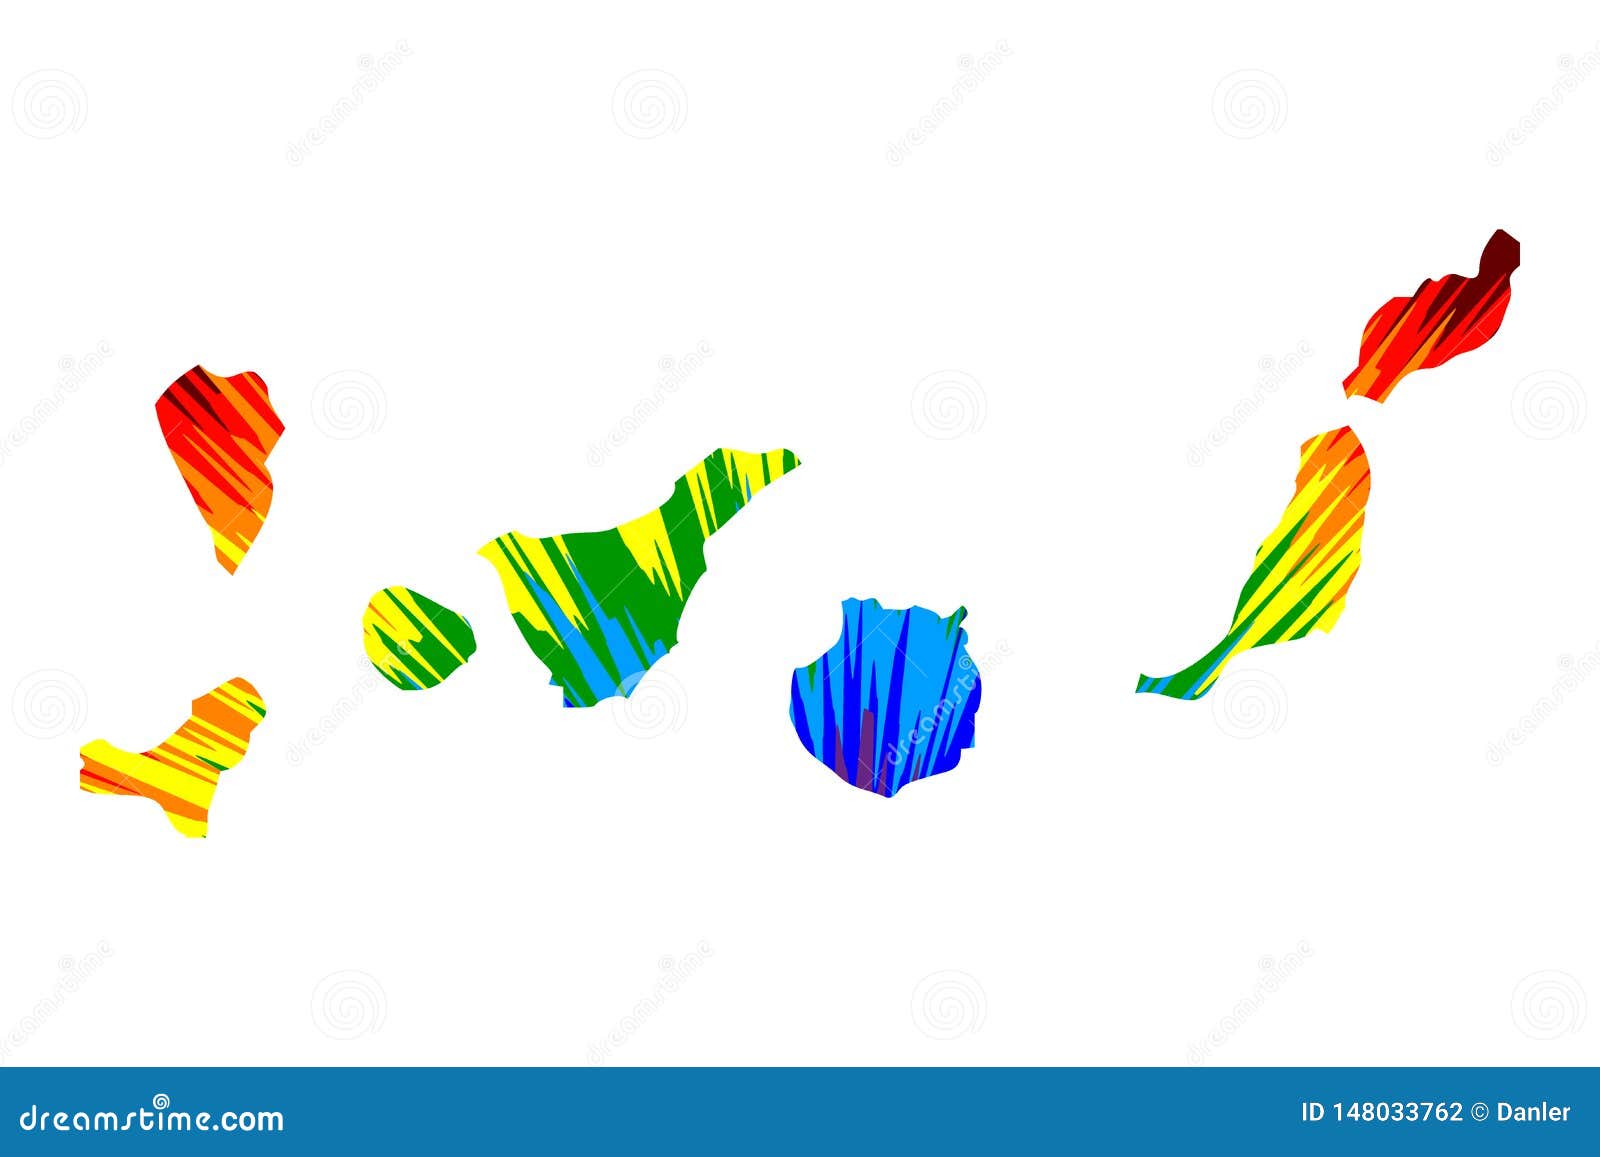 canary islands - map is ed rainbow abstract colorful pattern, islas canarias map made of color explosion